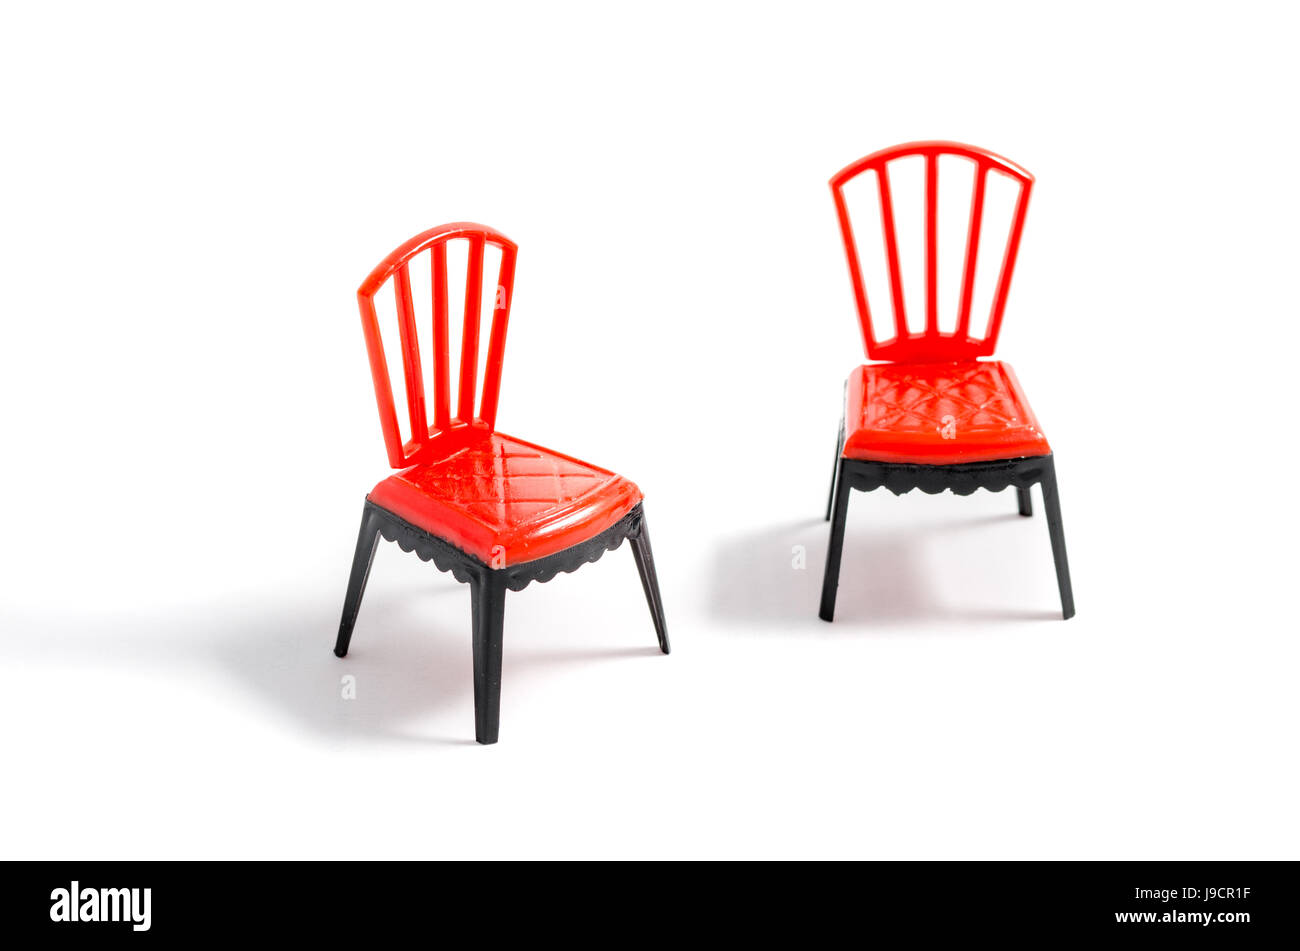 Red plastic chair on white background Stock Photo